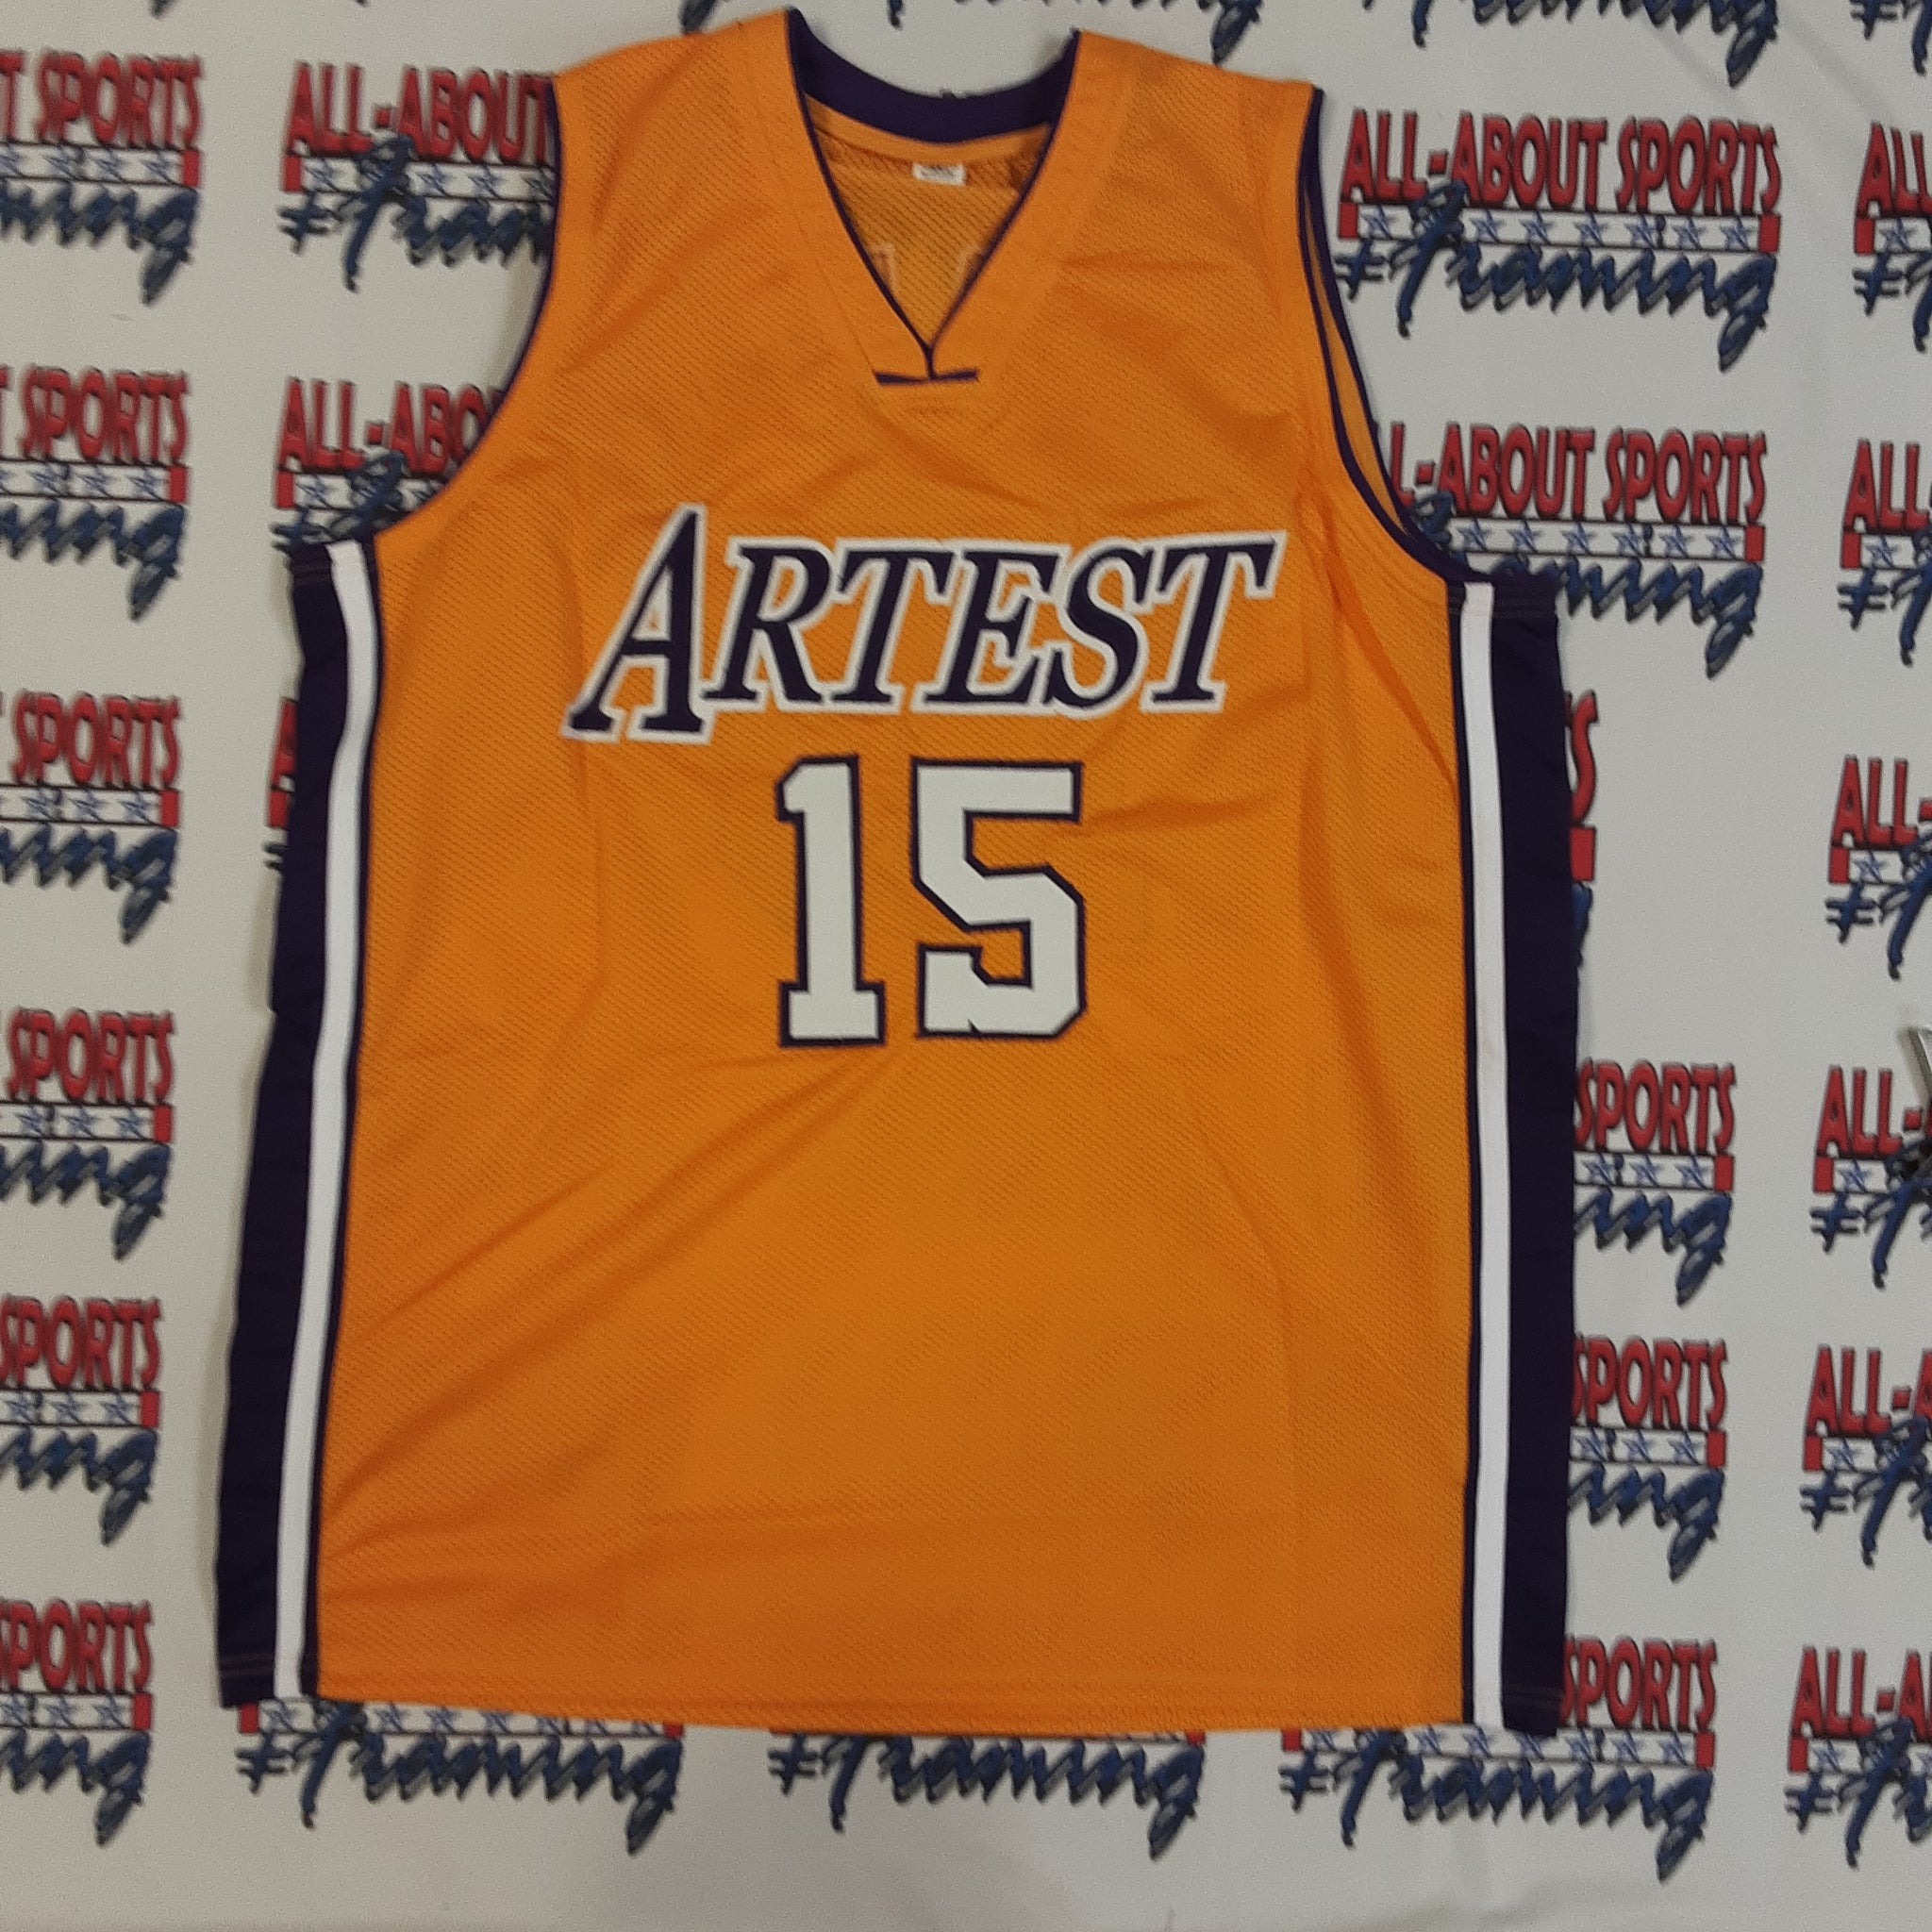 Adidas Lakers Ron Artest 15 Los Angeles NBA Jersey